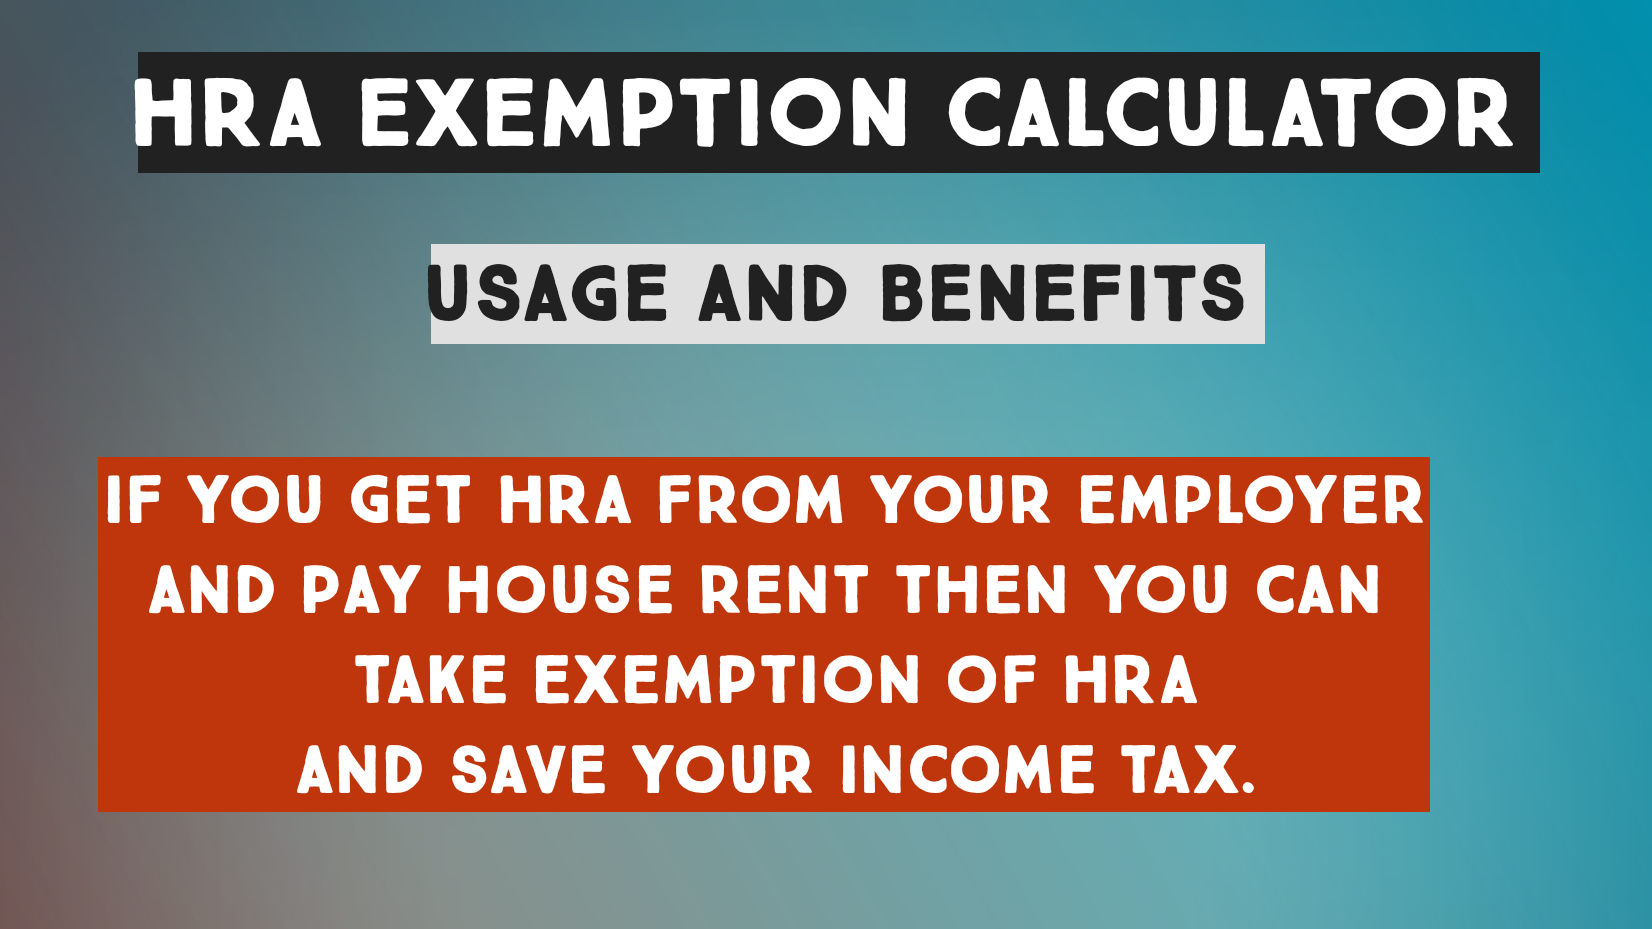 HRA Exemption Calculator For Income Tax Benefits Calculation And 